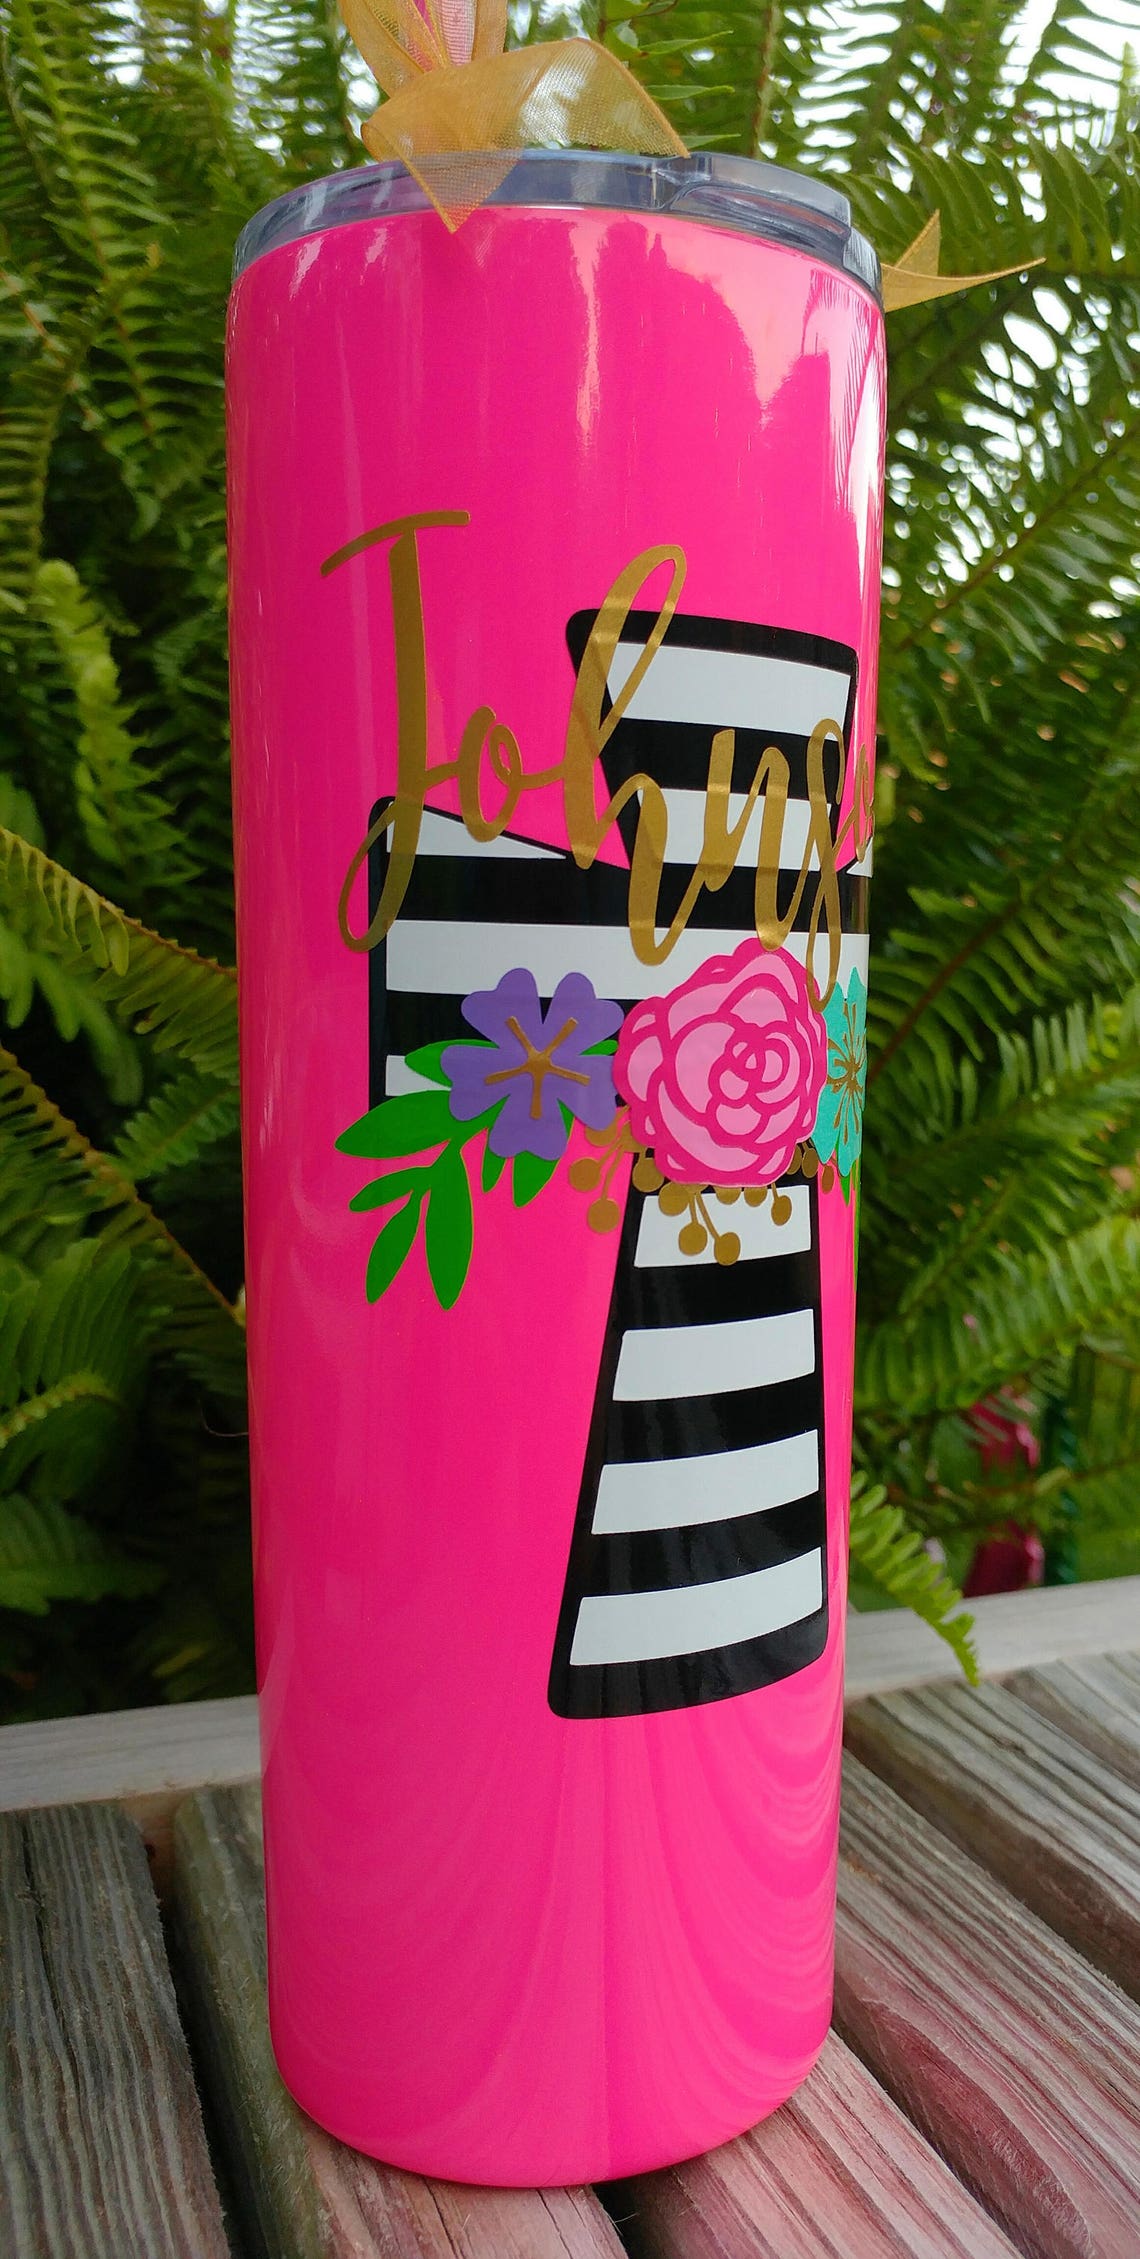 Download Striped Cross Skinny Tumbler-With Layered Flowers ...